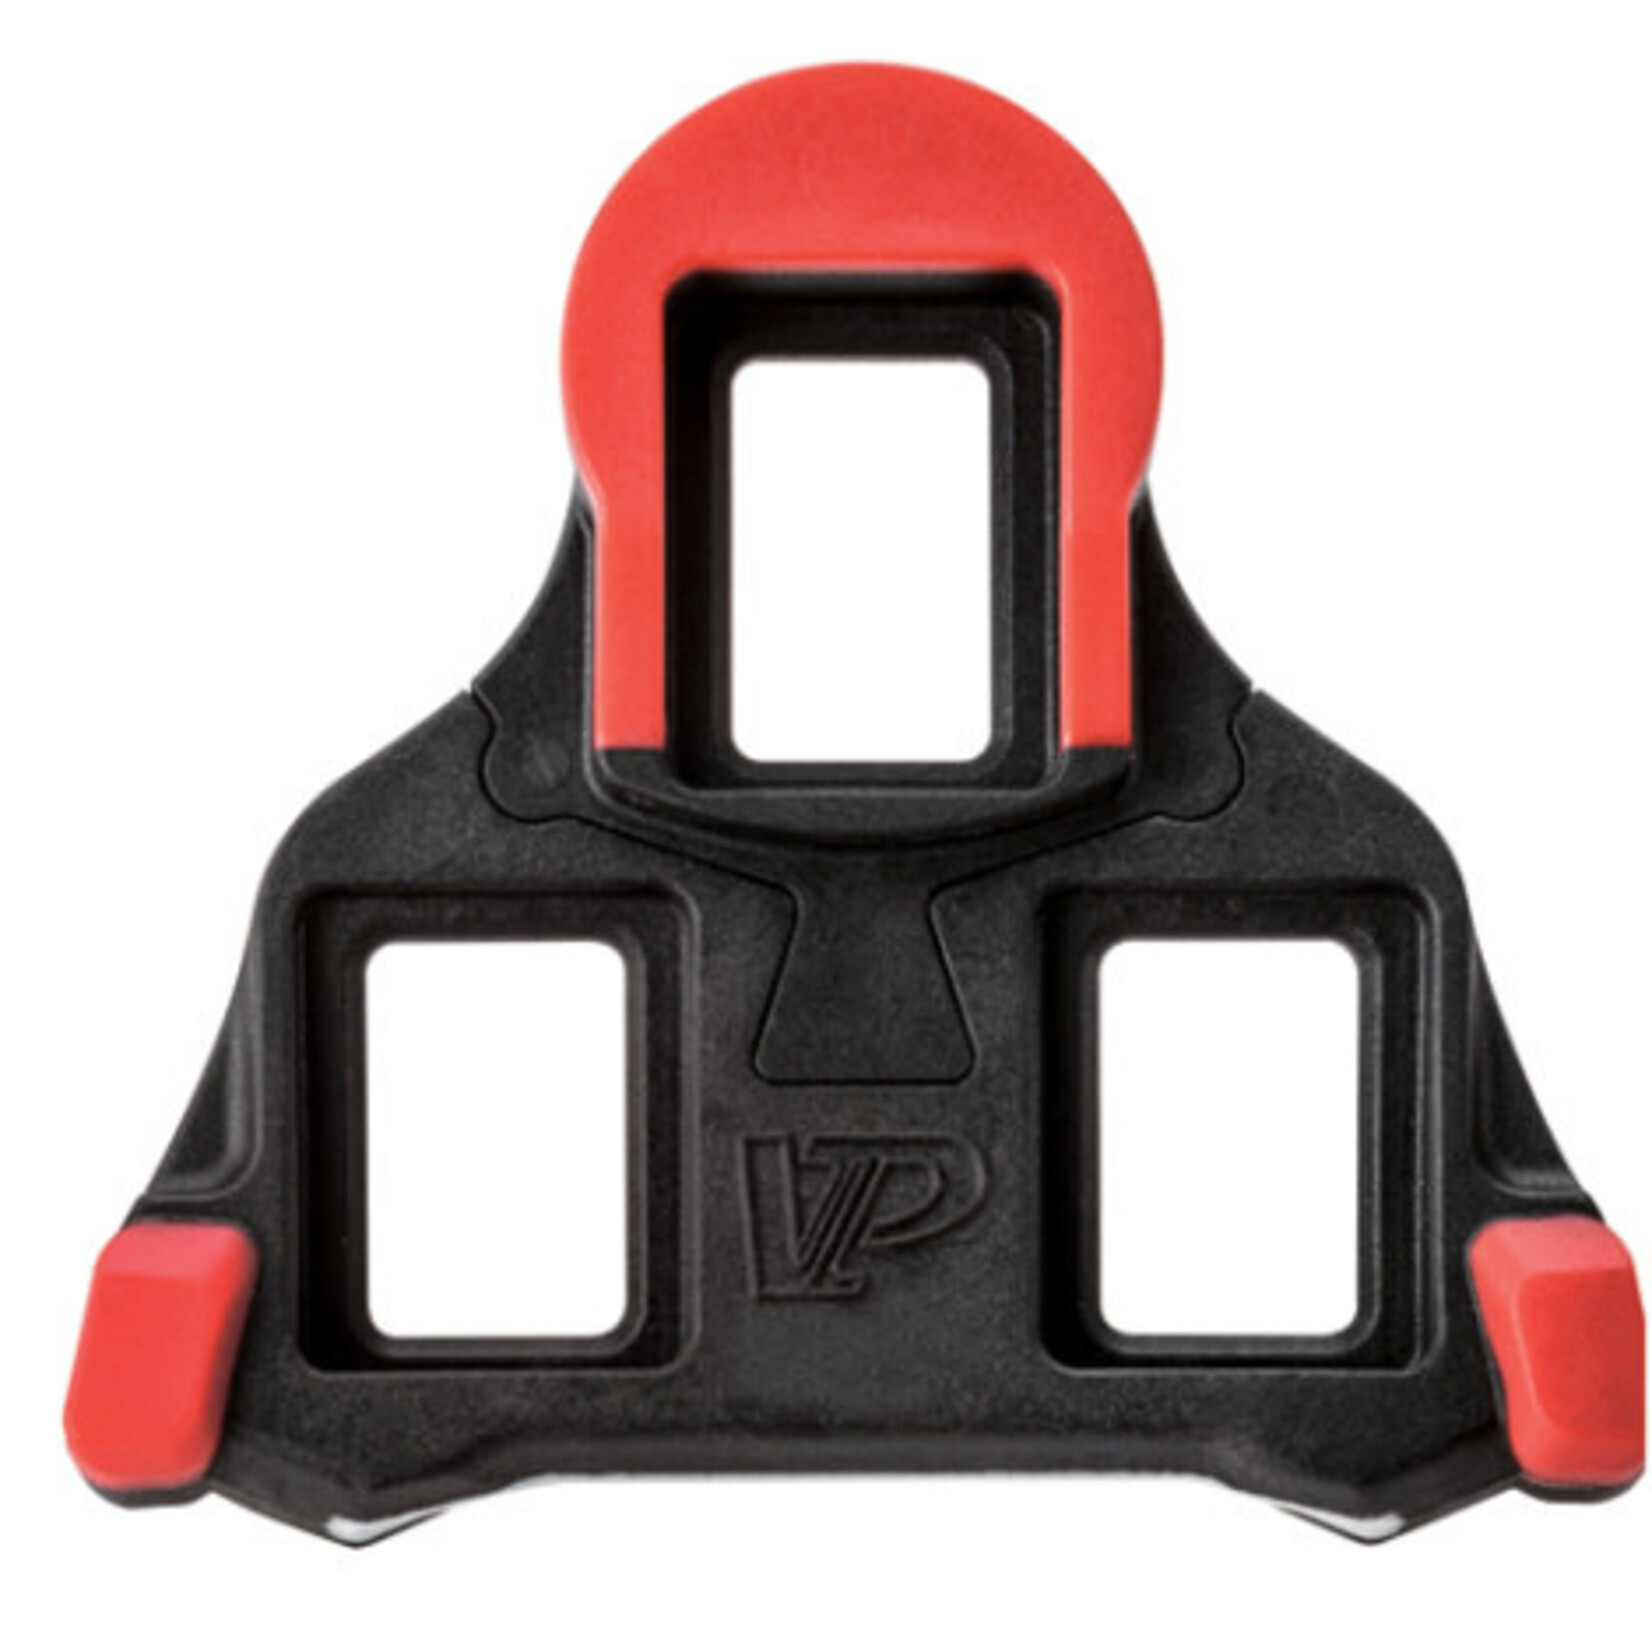 VP VP Components Perfect Placement Cleats SPD SL - Red 0deg Fixed